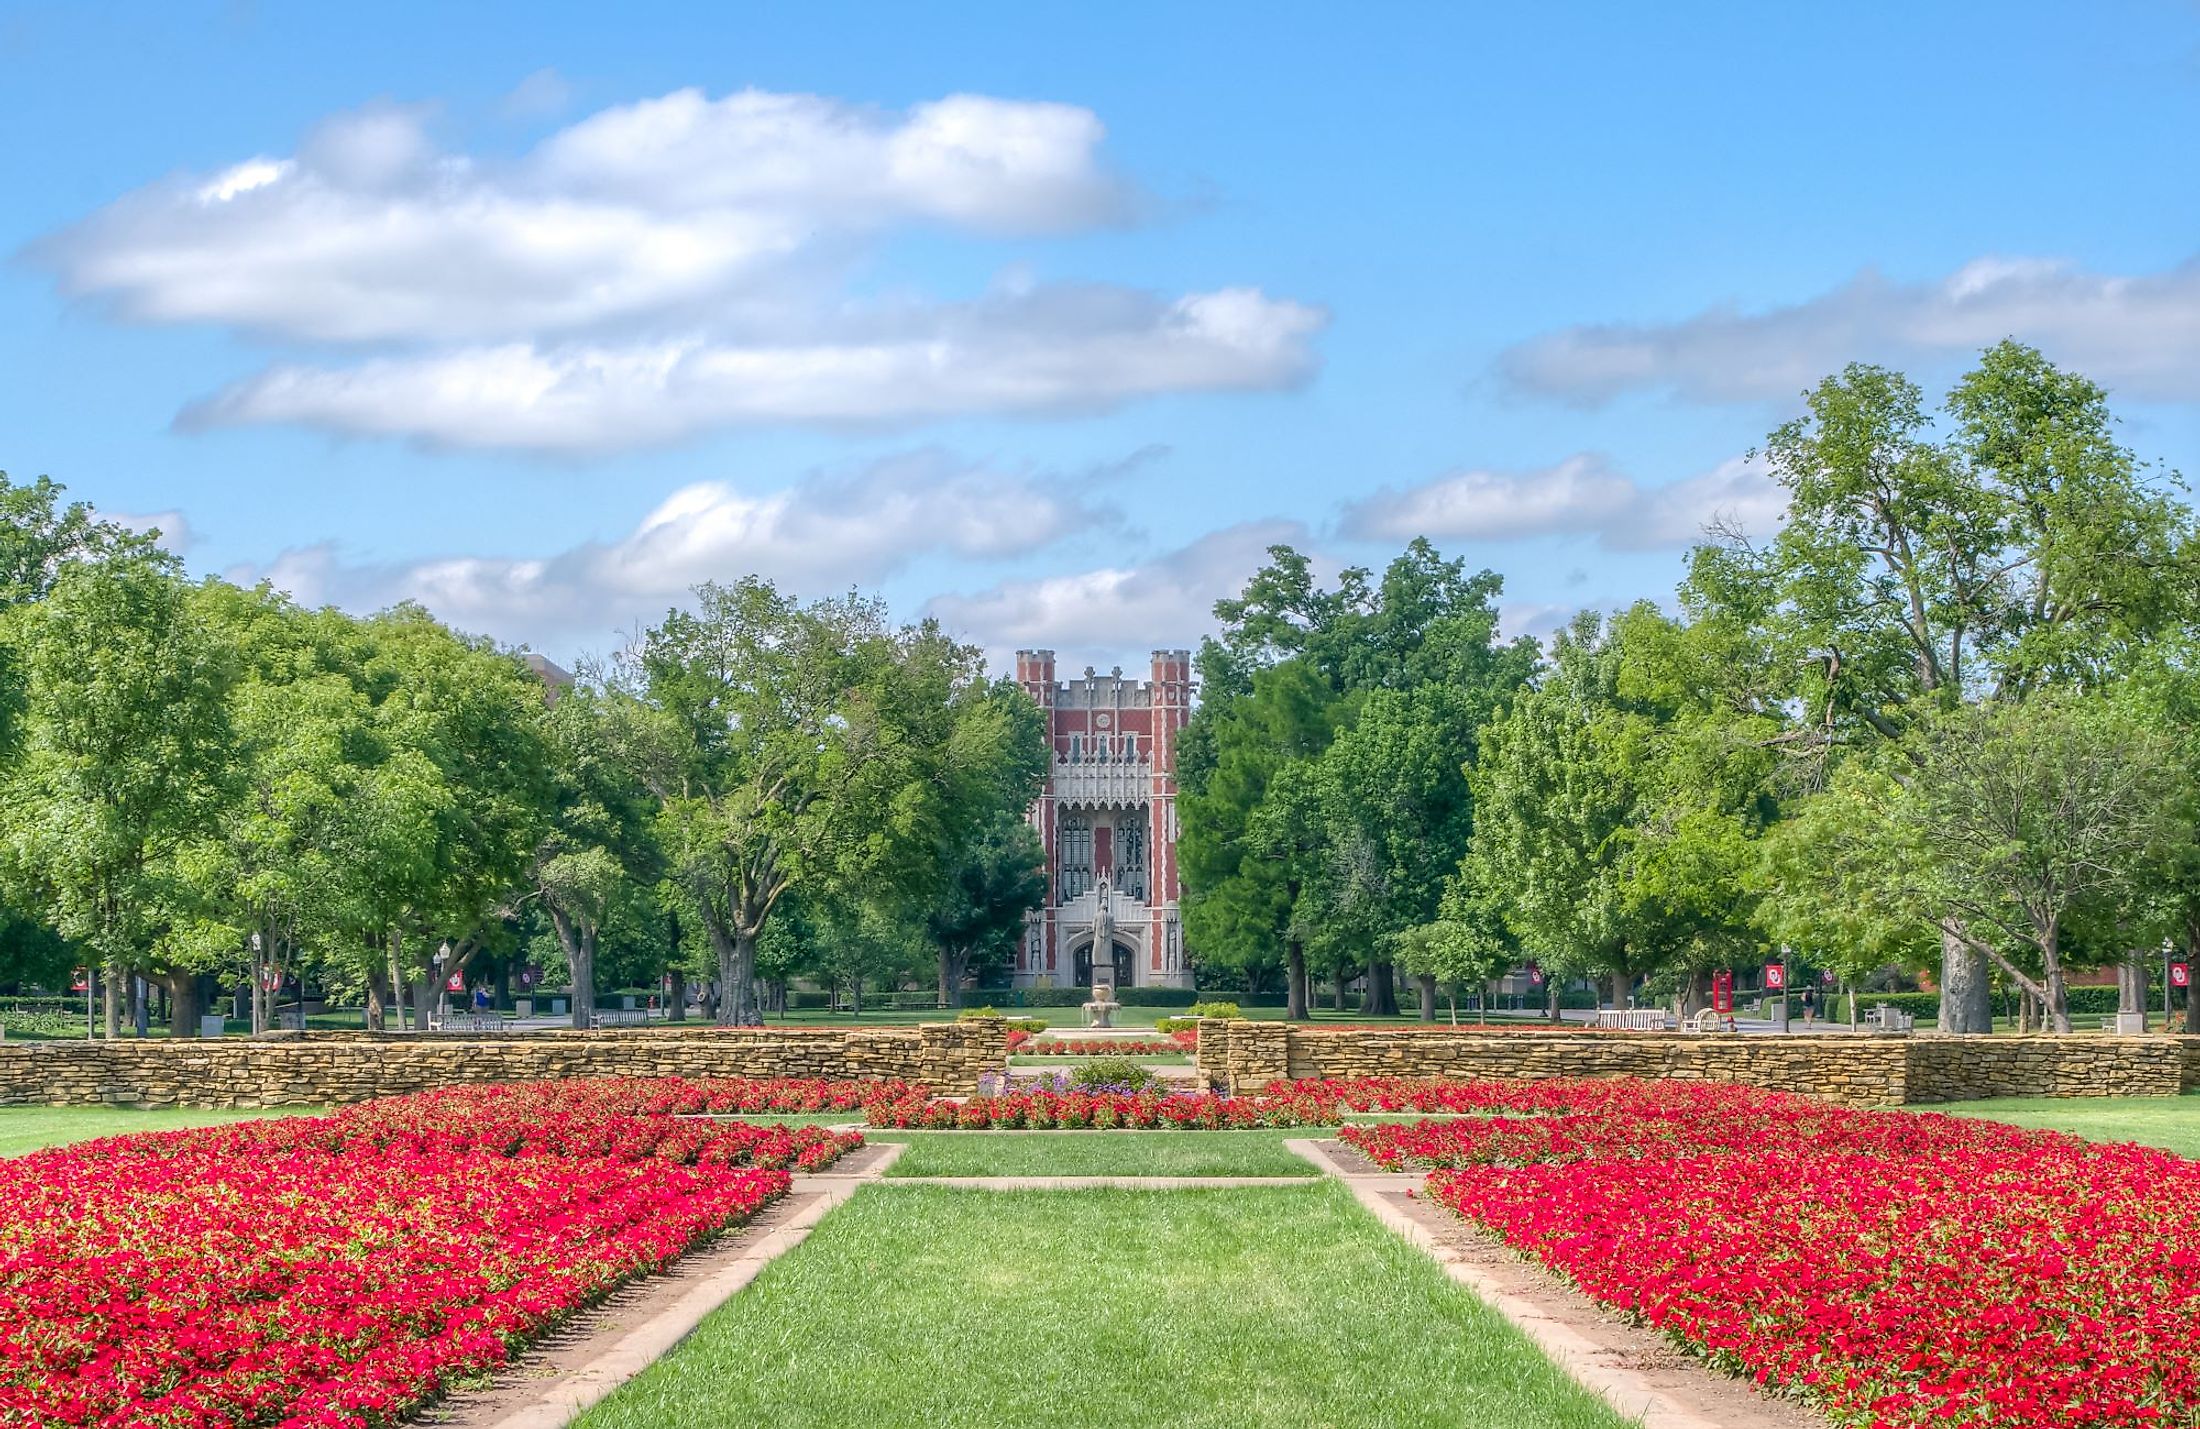 Central grounds and gardens at the campus of the University of Oklahoma in Norman, Oklahoma. Editorial credit: Ken Wolter / Shutterstock.com